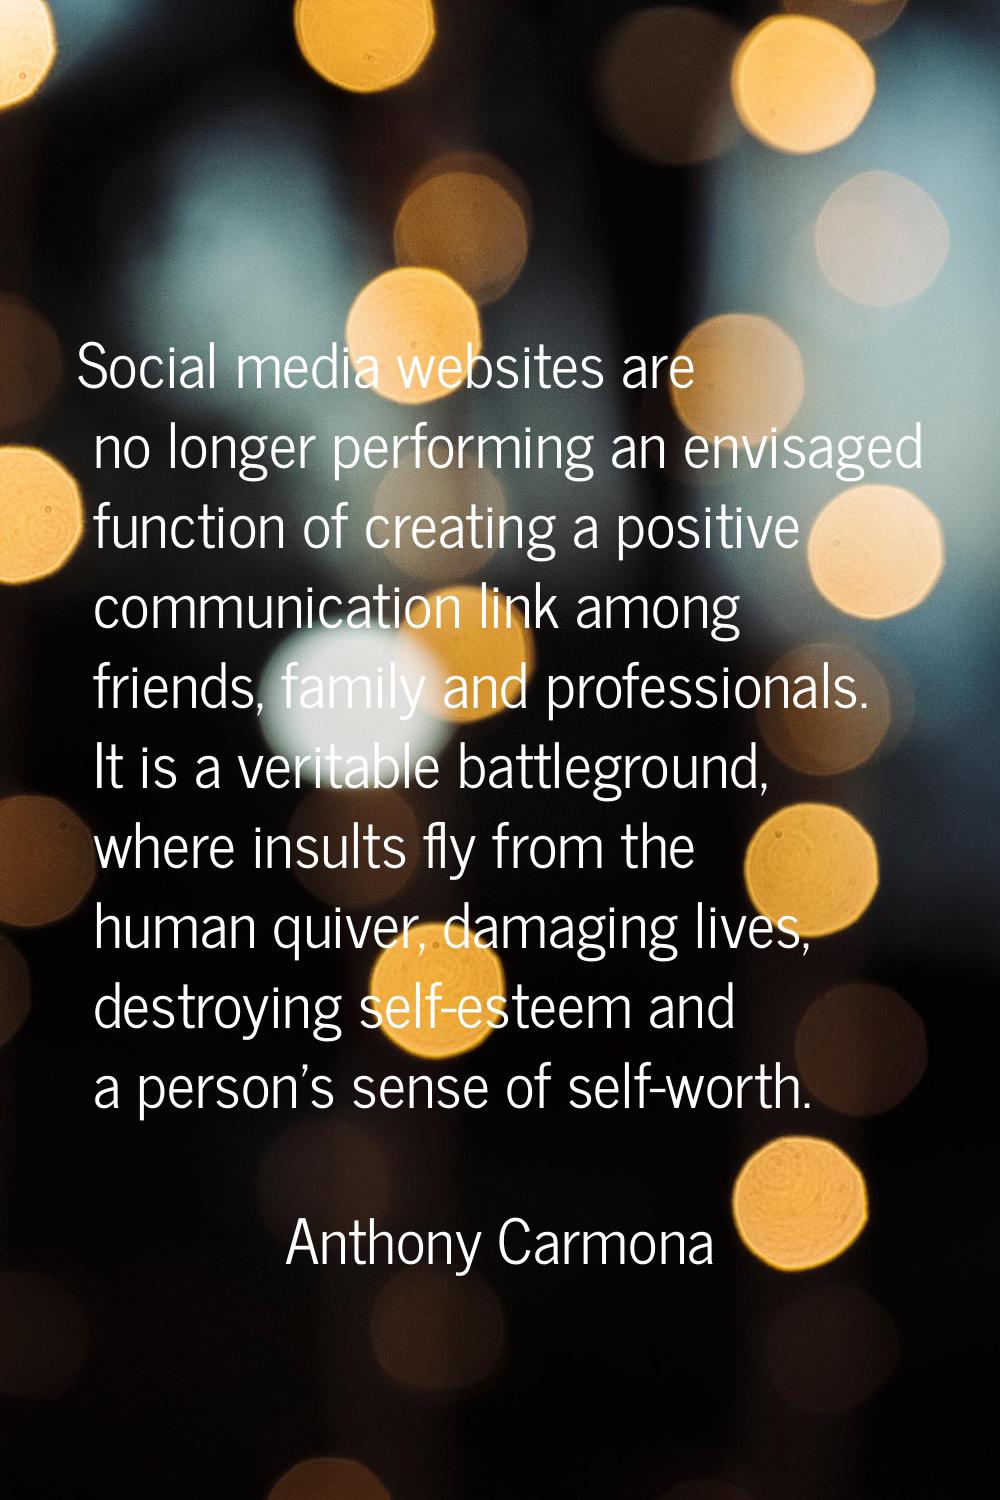 Social media websites are no longer performing an envisaged function of creating a positive communi